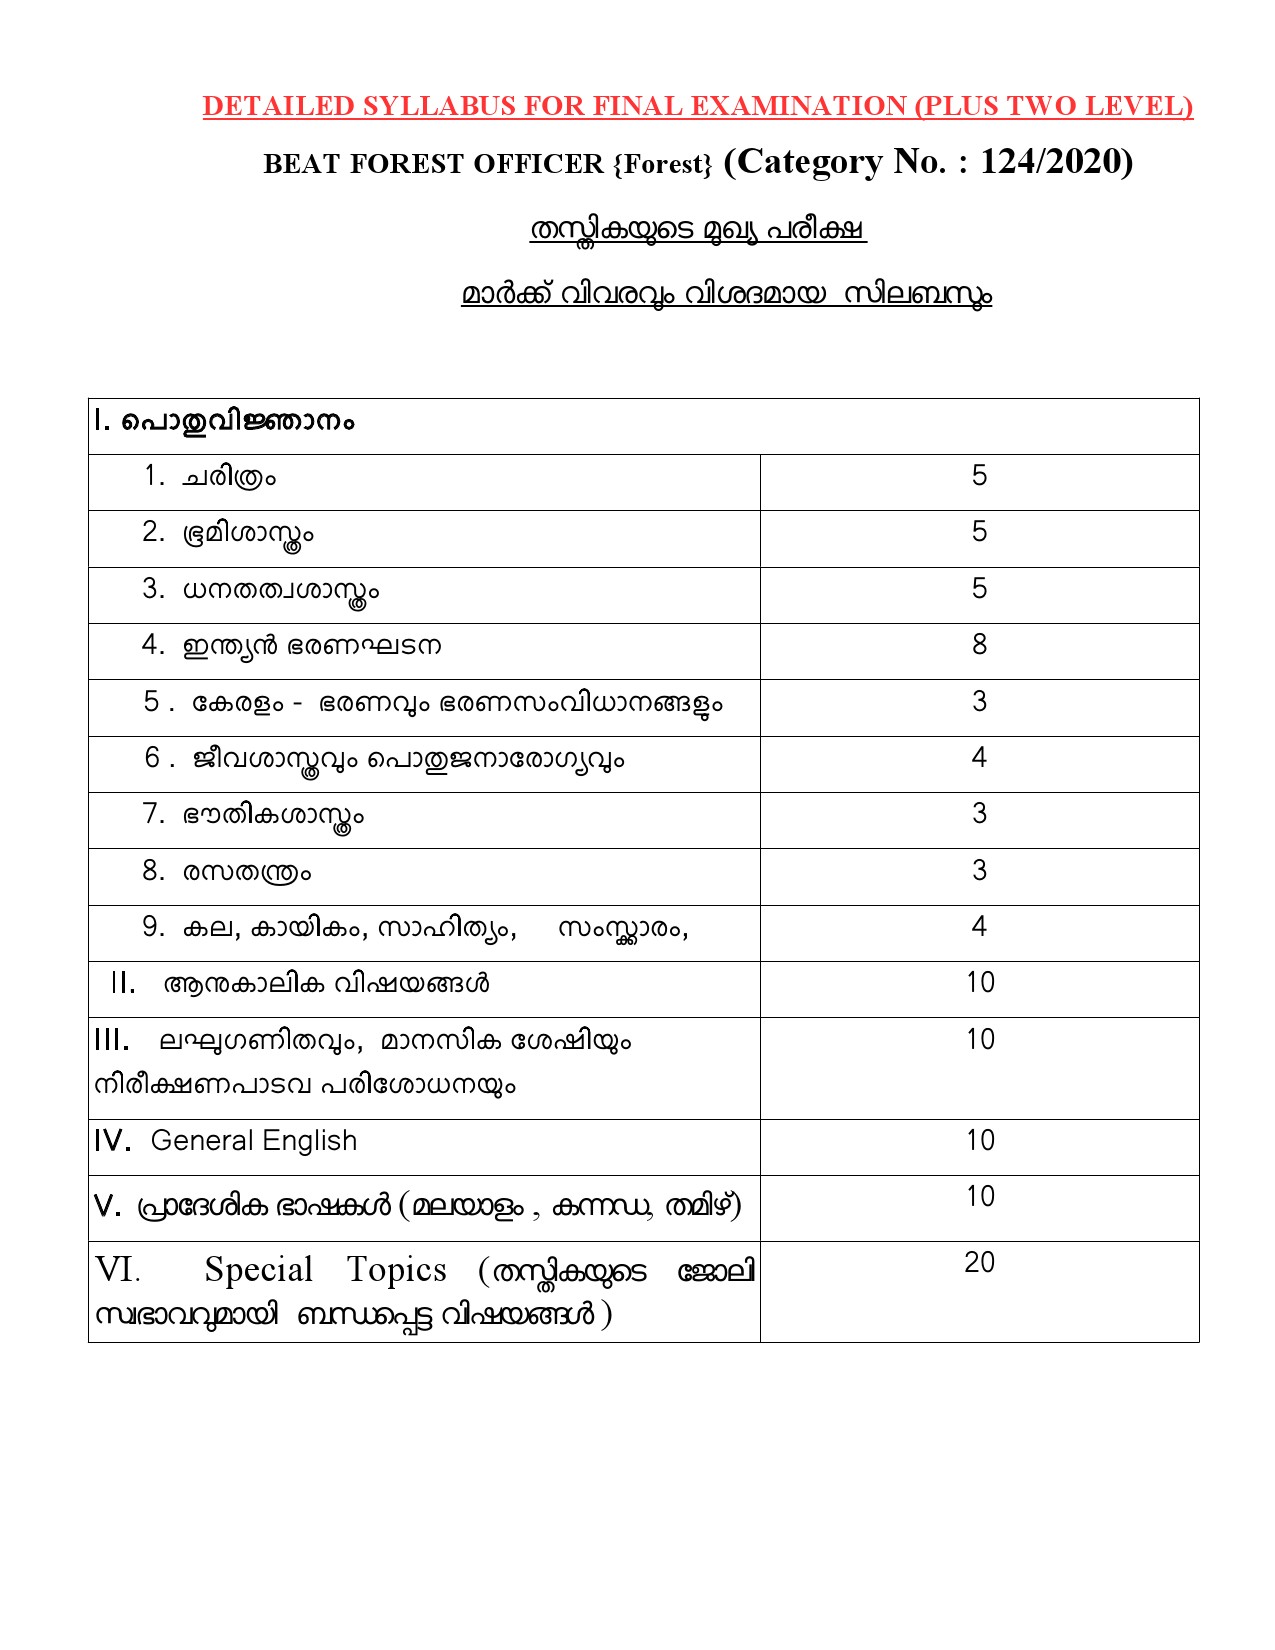 Beat Forest Officer Final Examination Syllabus For Plus Two Level - Notification Image 1